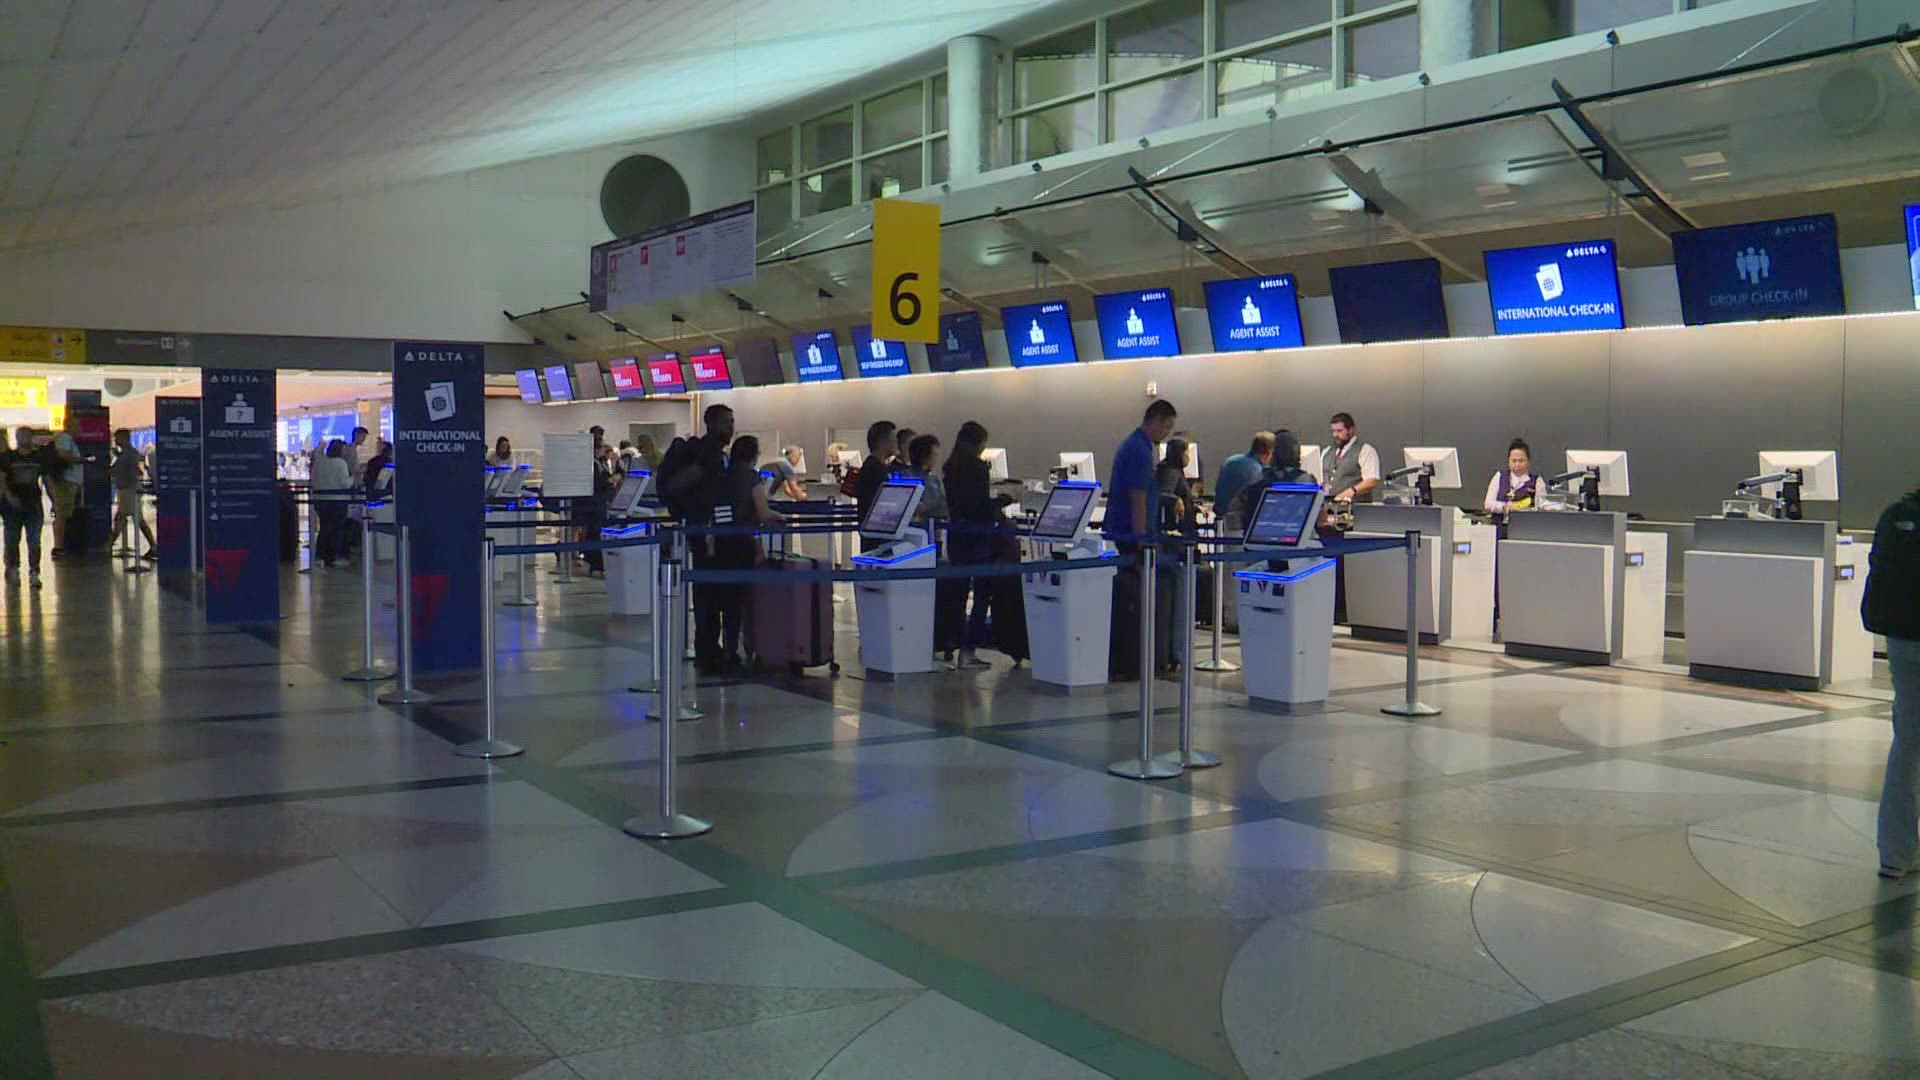 Airline check-in counters for Spirit and Delta will be temporarily moving from the east side to a new position on the west side of the Jeppesen Terminal.